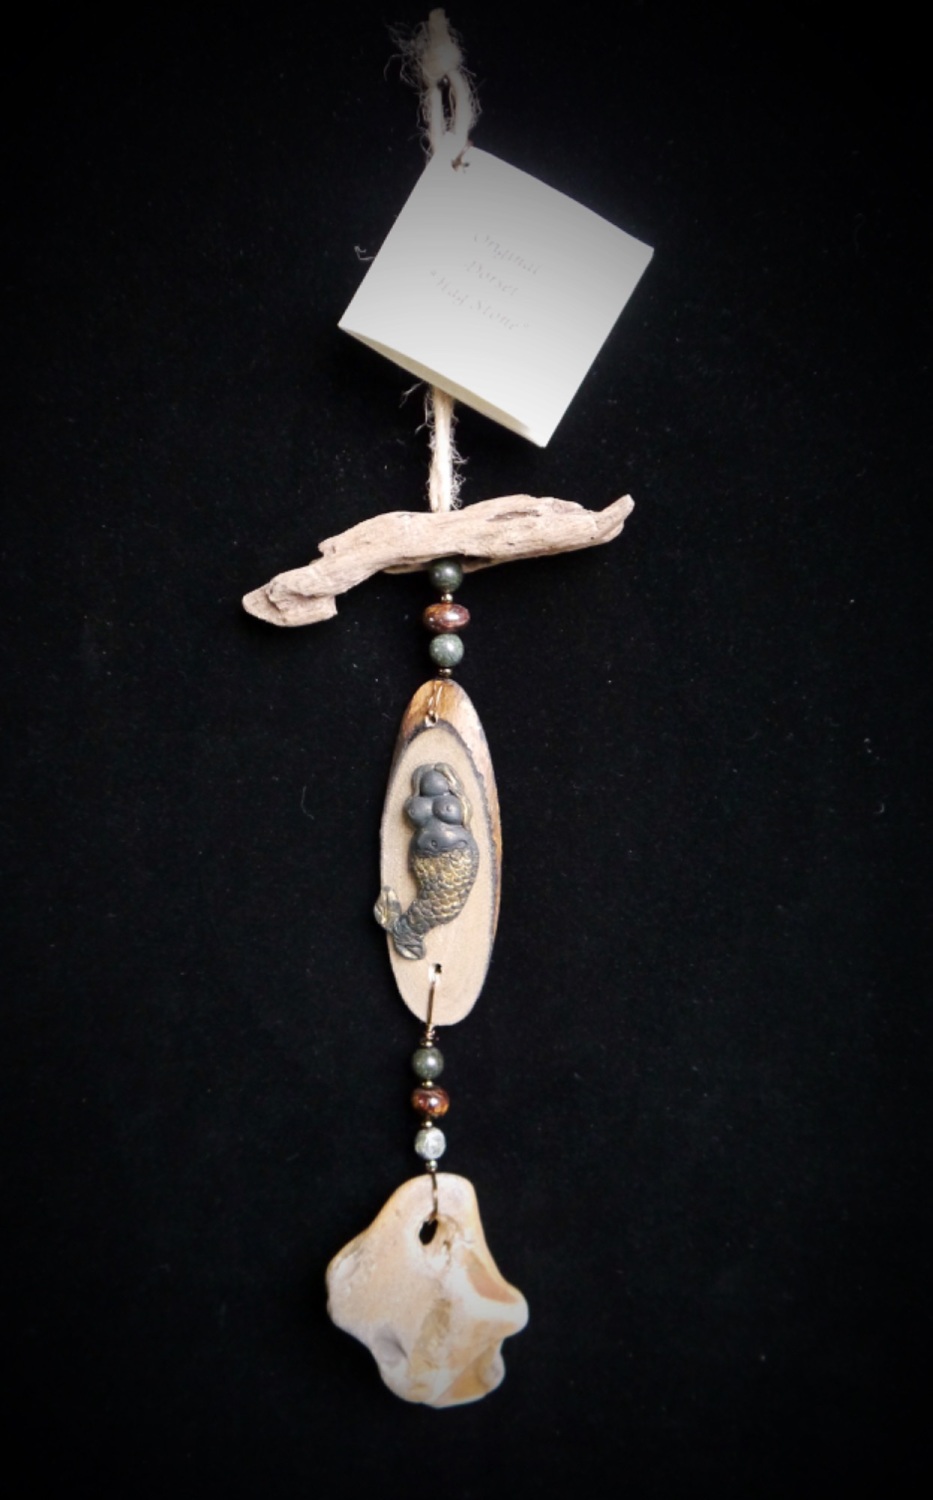 Mermaid Hag Stone protection charm with Pietersite and Serpentine crystals